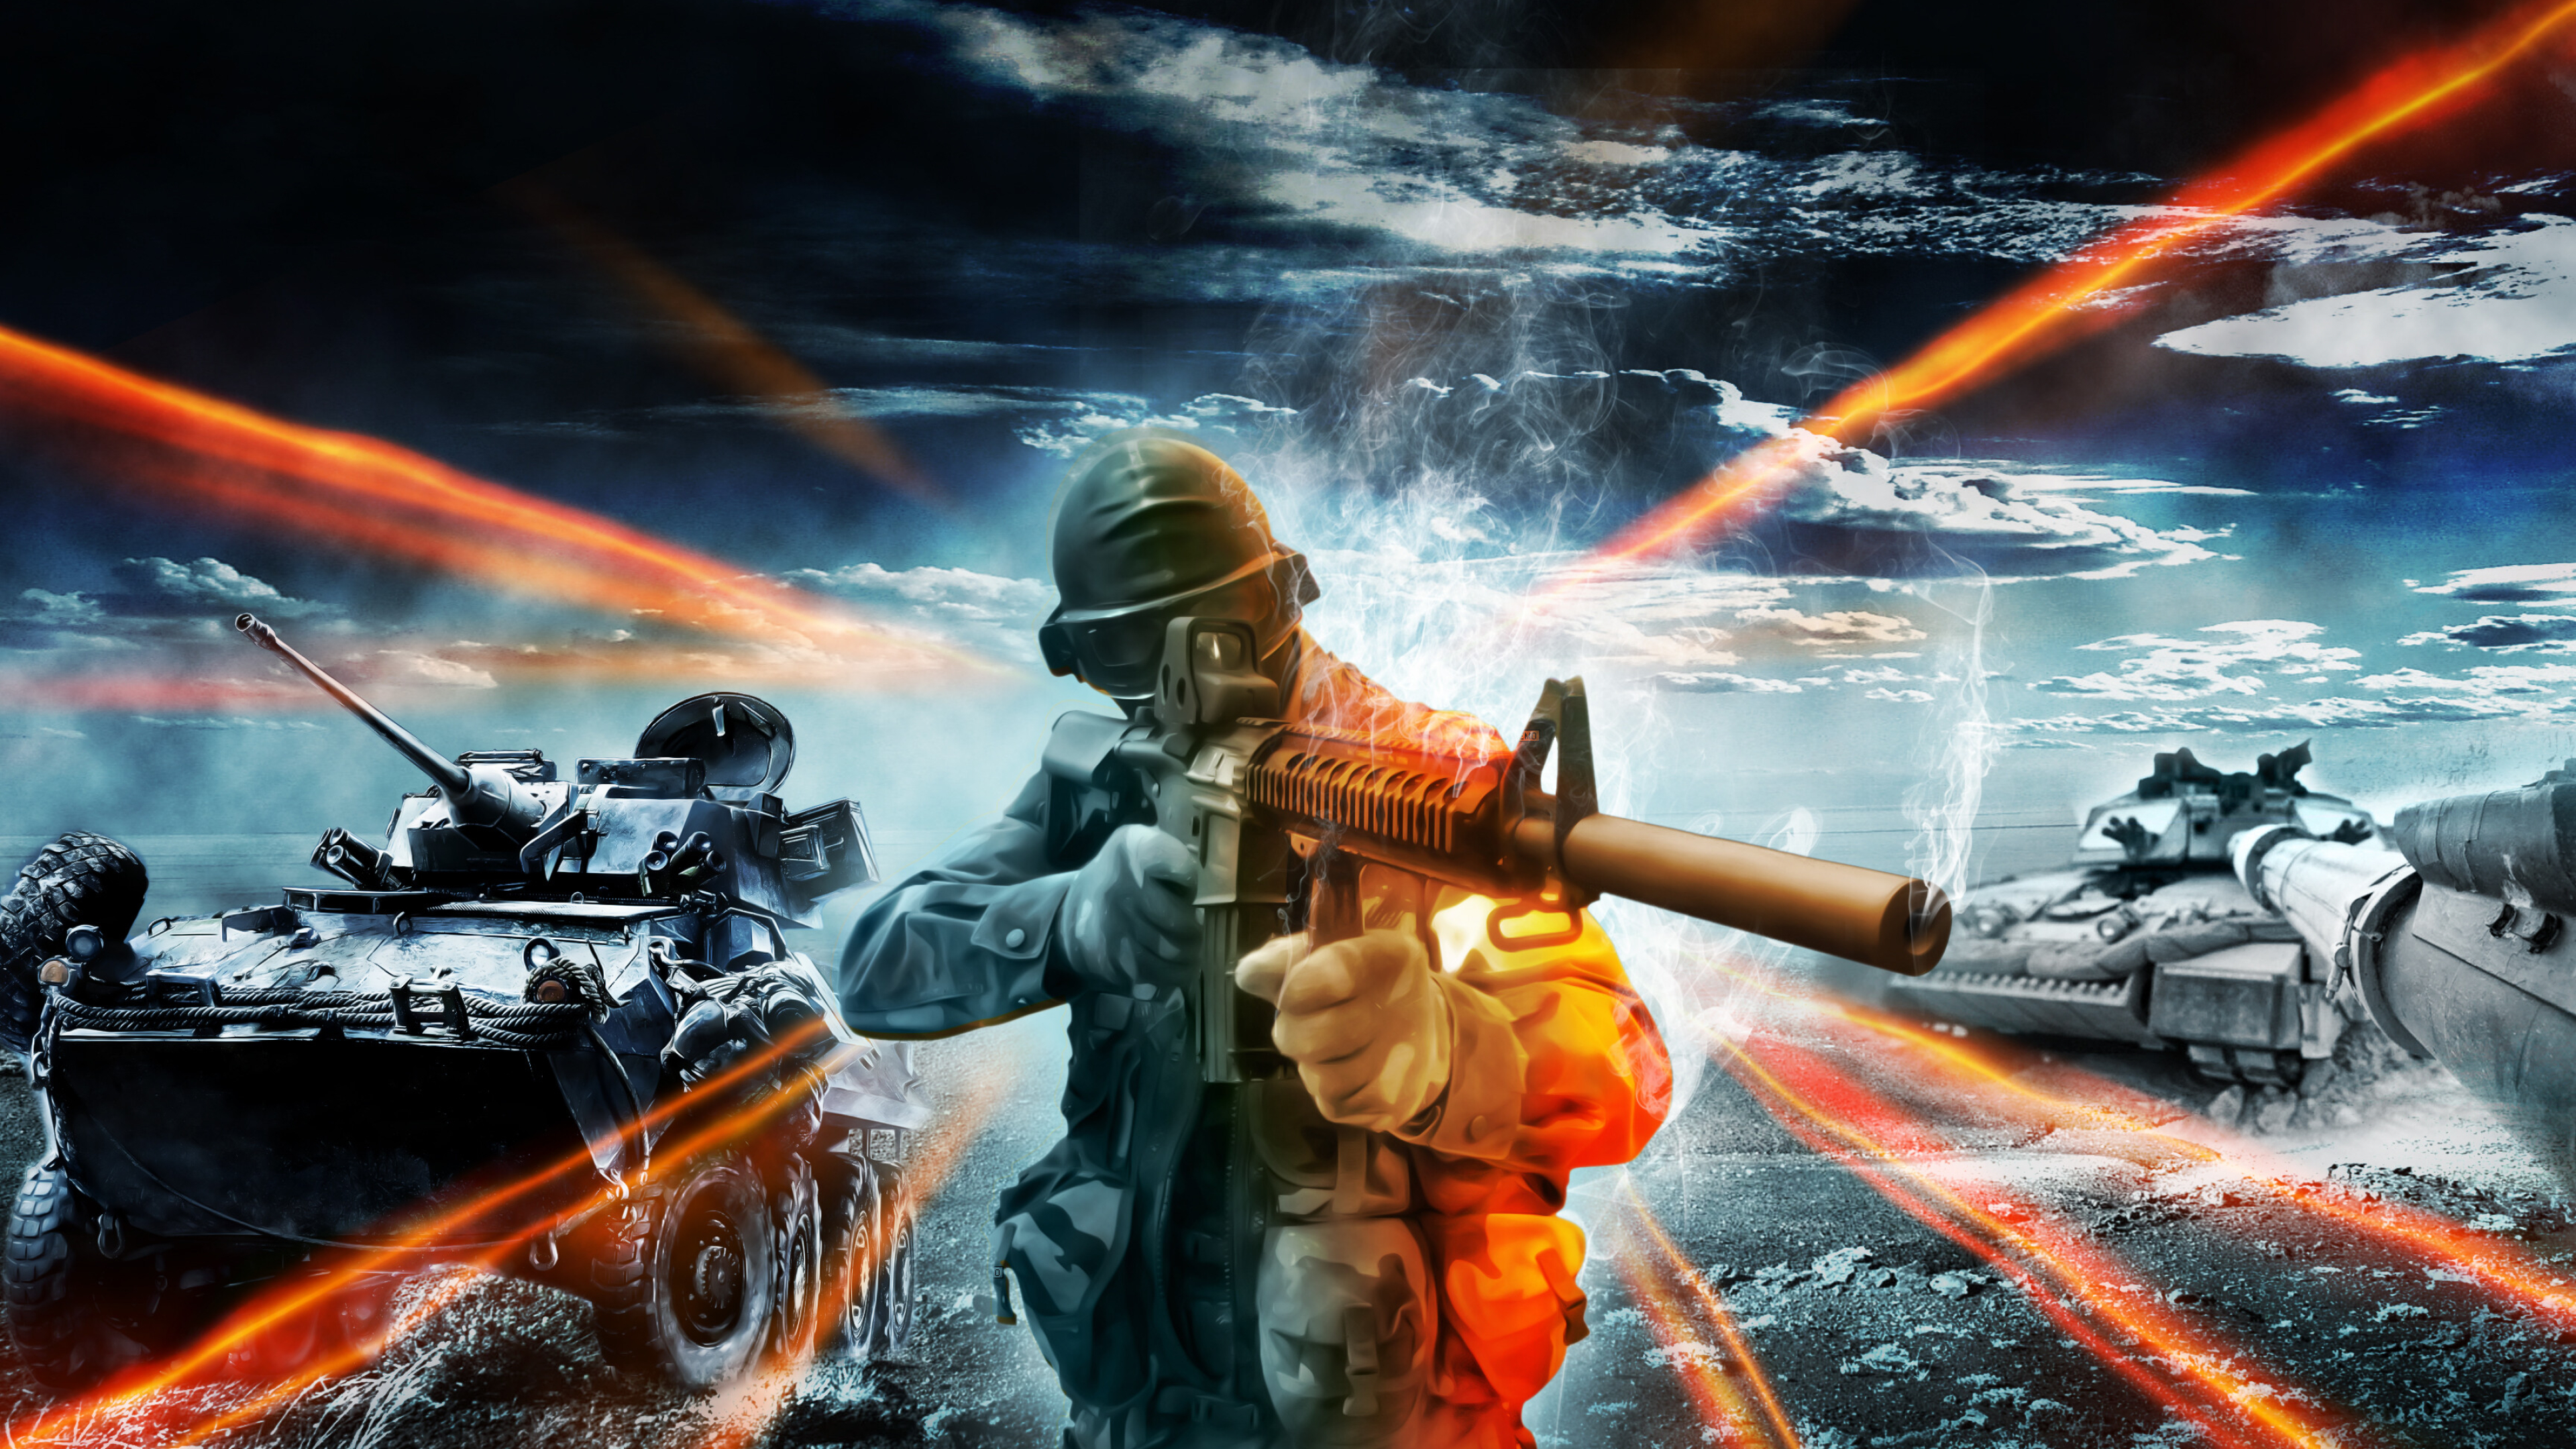 Battlefield 3: BF3, Published by Electronic Arts for Microsoft Windows, PlayStation 3 and Xbox 360. 3840x2160 4K Wallpaper.